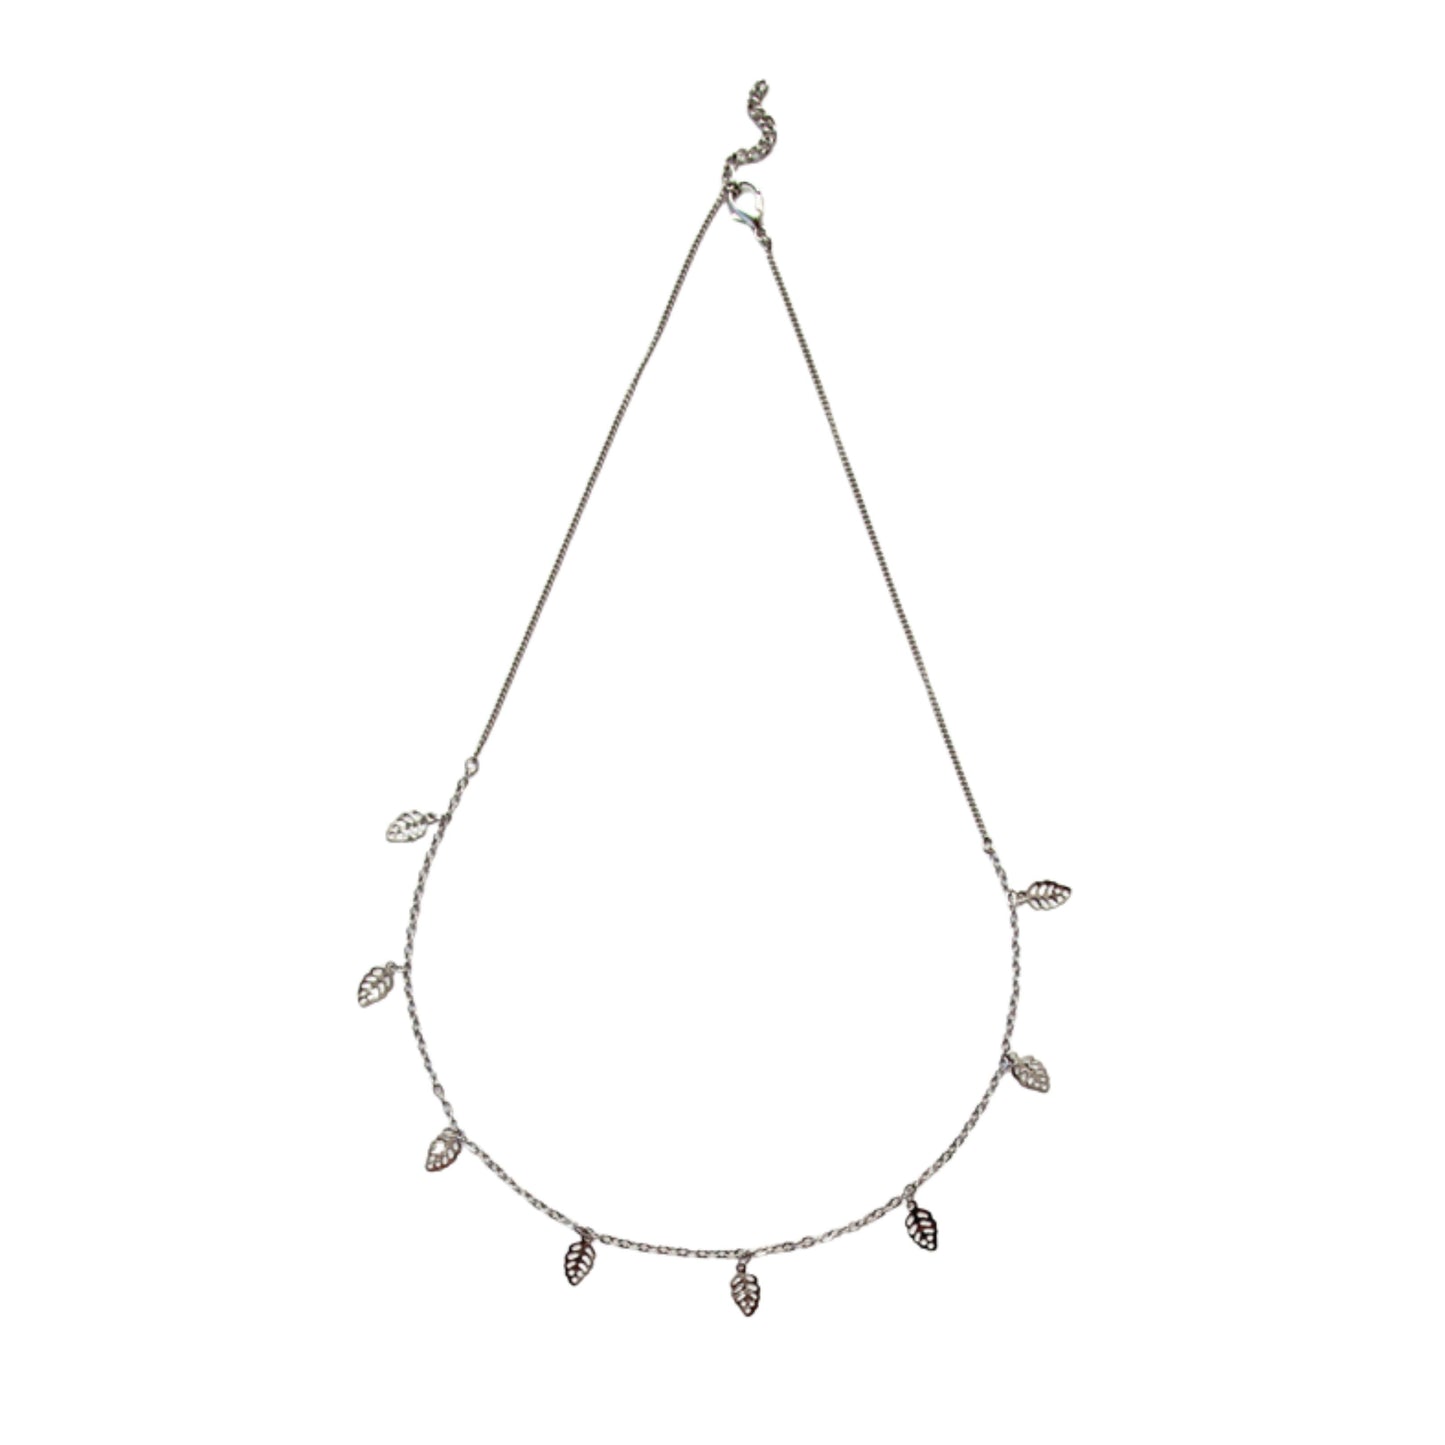 Delicate Silver Leaf Charm Necklace